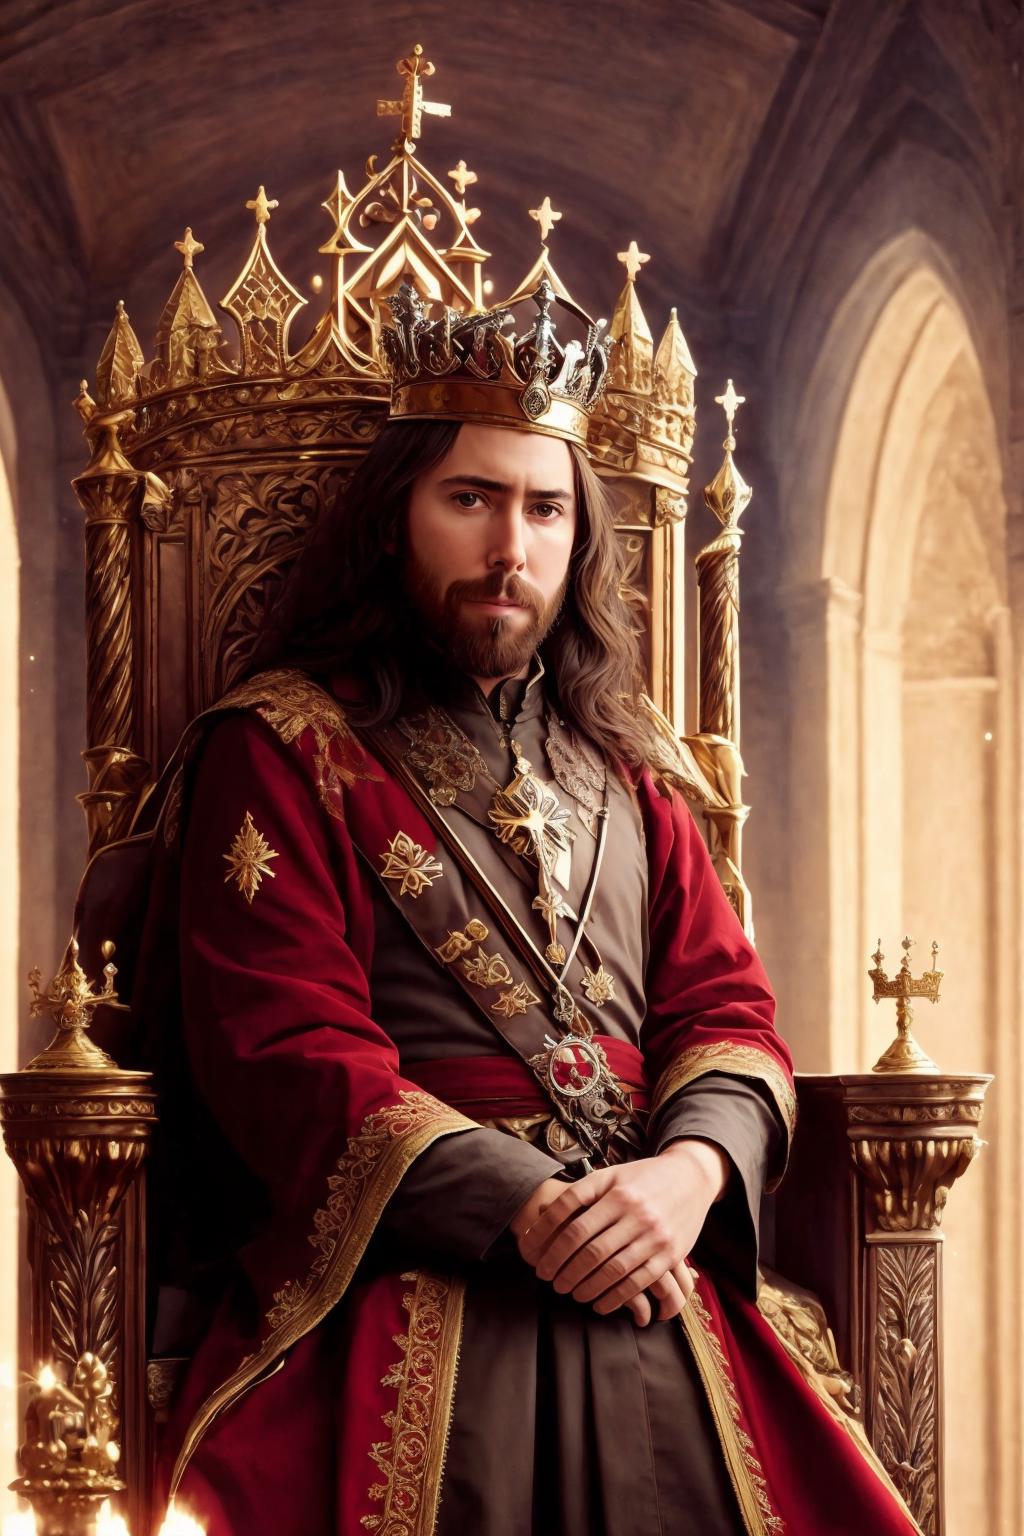 A man wearing a crown and a beard sitting on a chair.